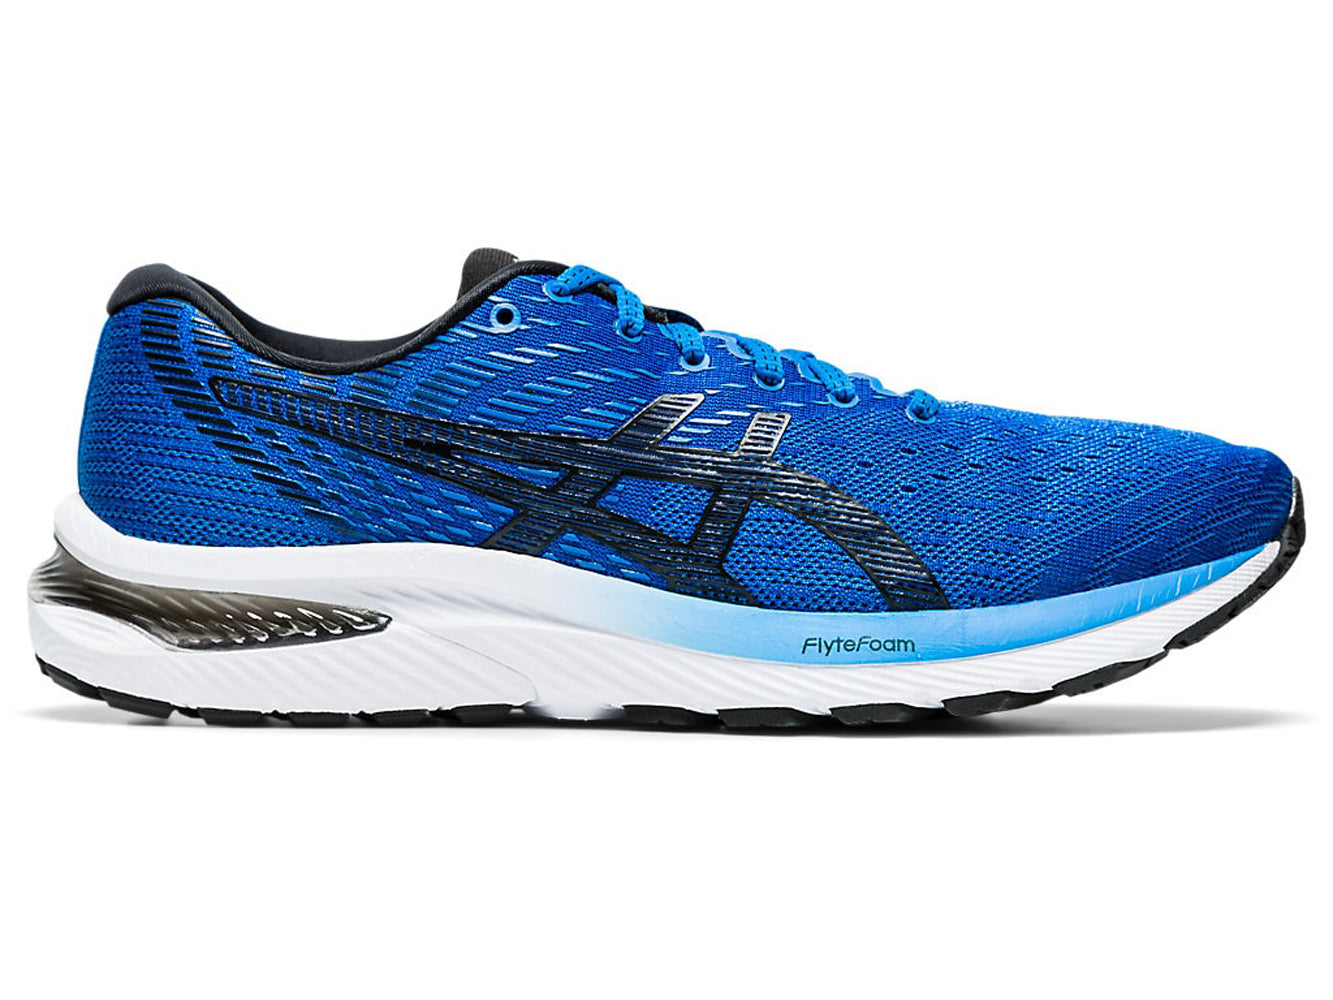 Men's Asics GEL-Cumulus 22 Running Shoe in Directoire Blue/Black from the side